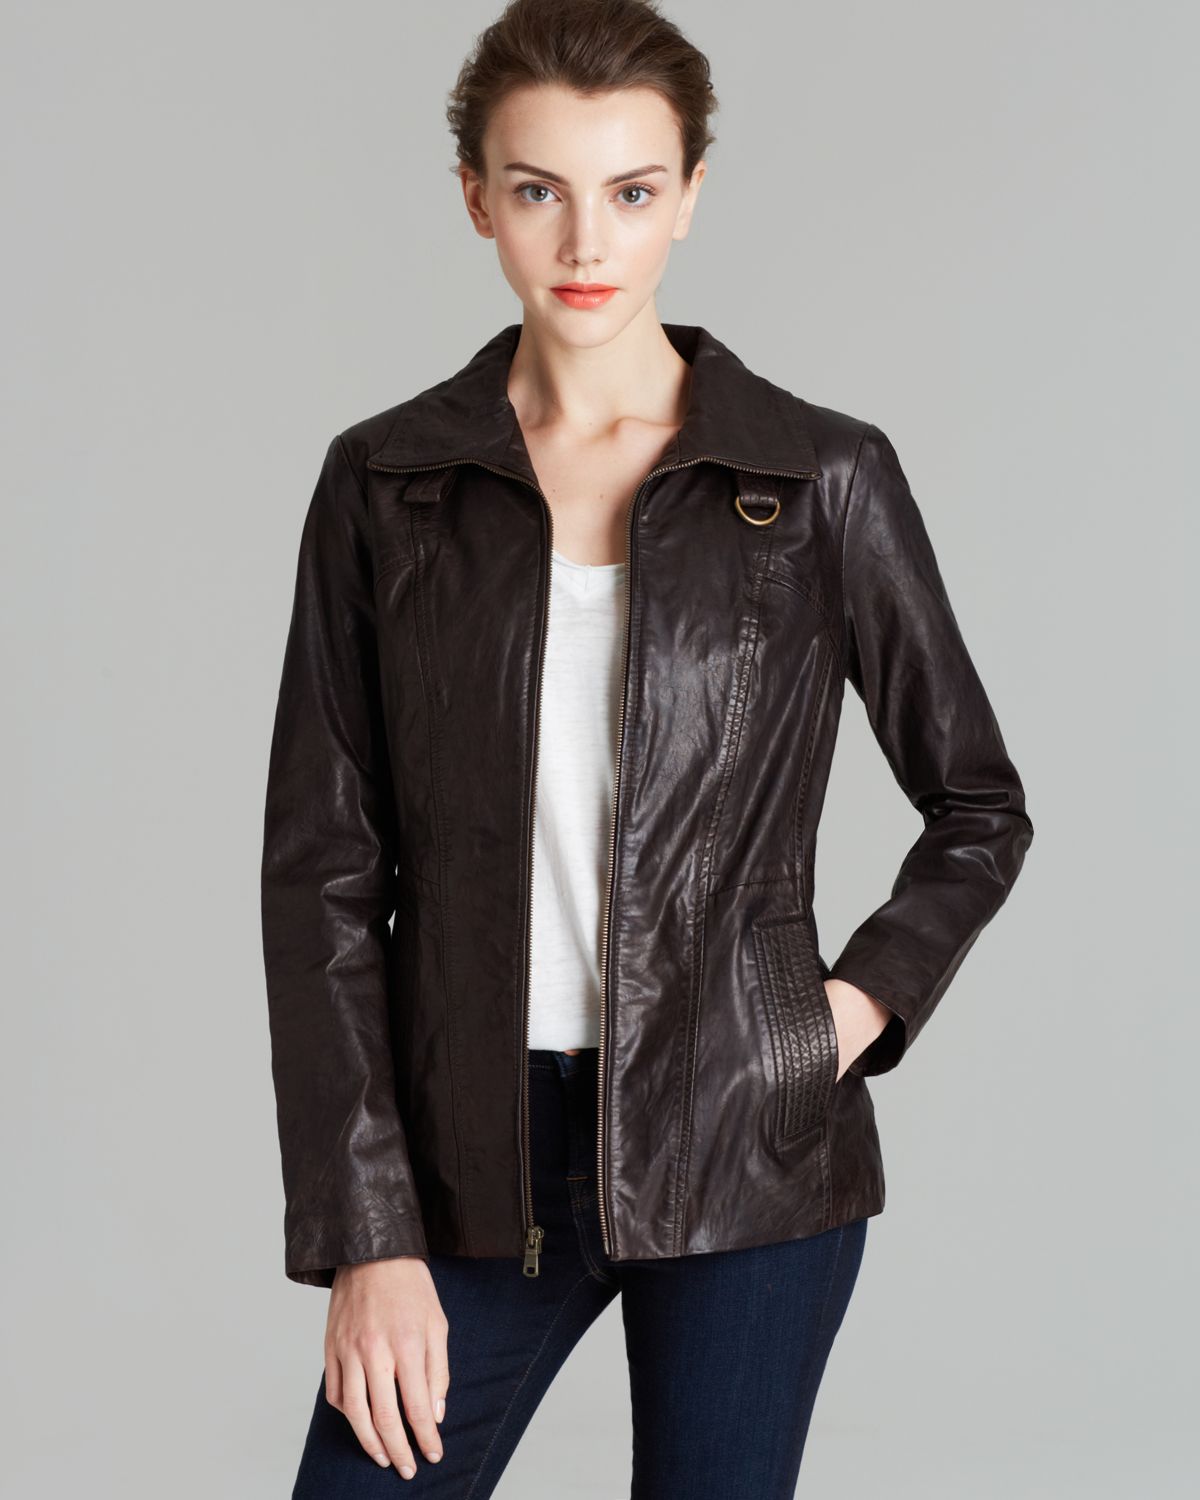 Marc New York Leather Jacket Rugged in Brown - Lyst